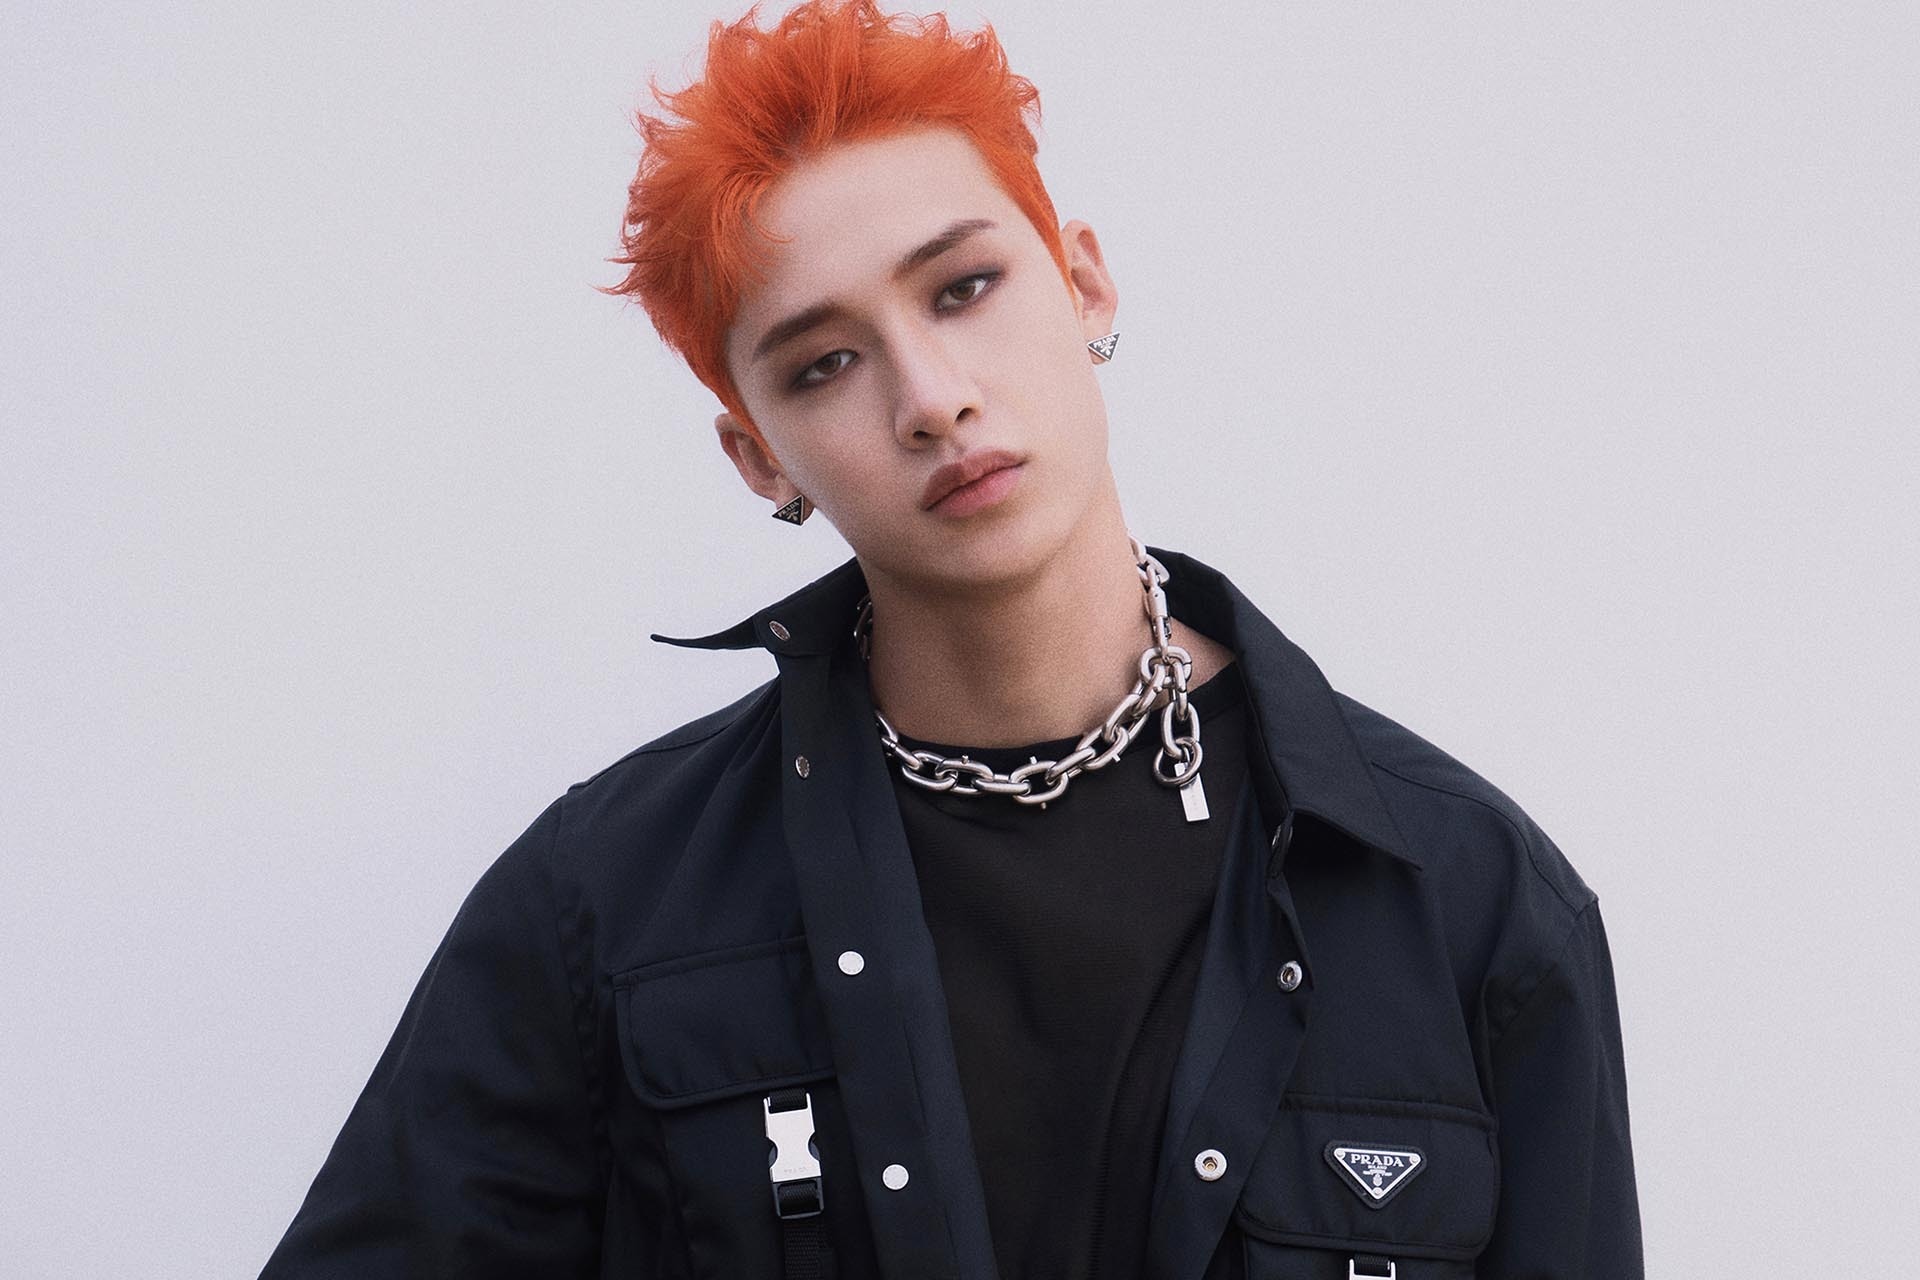 Bang Chan Biography: Age, Siblings, Net Worth, Songs, Girlfriend, Parents, Education, Height